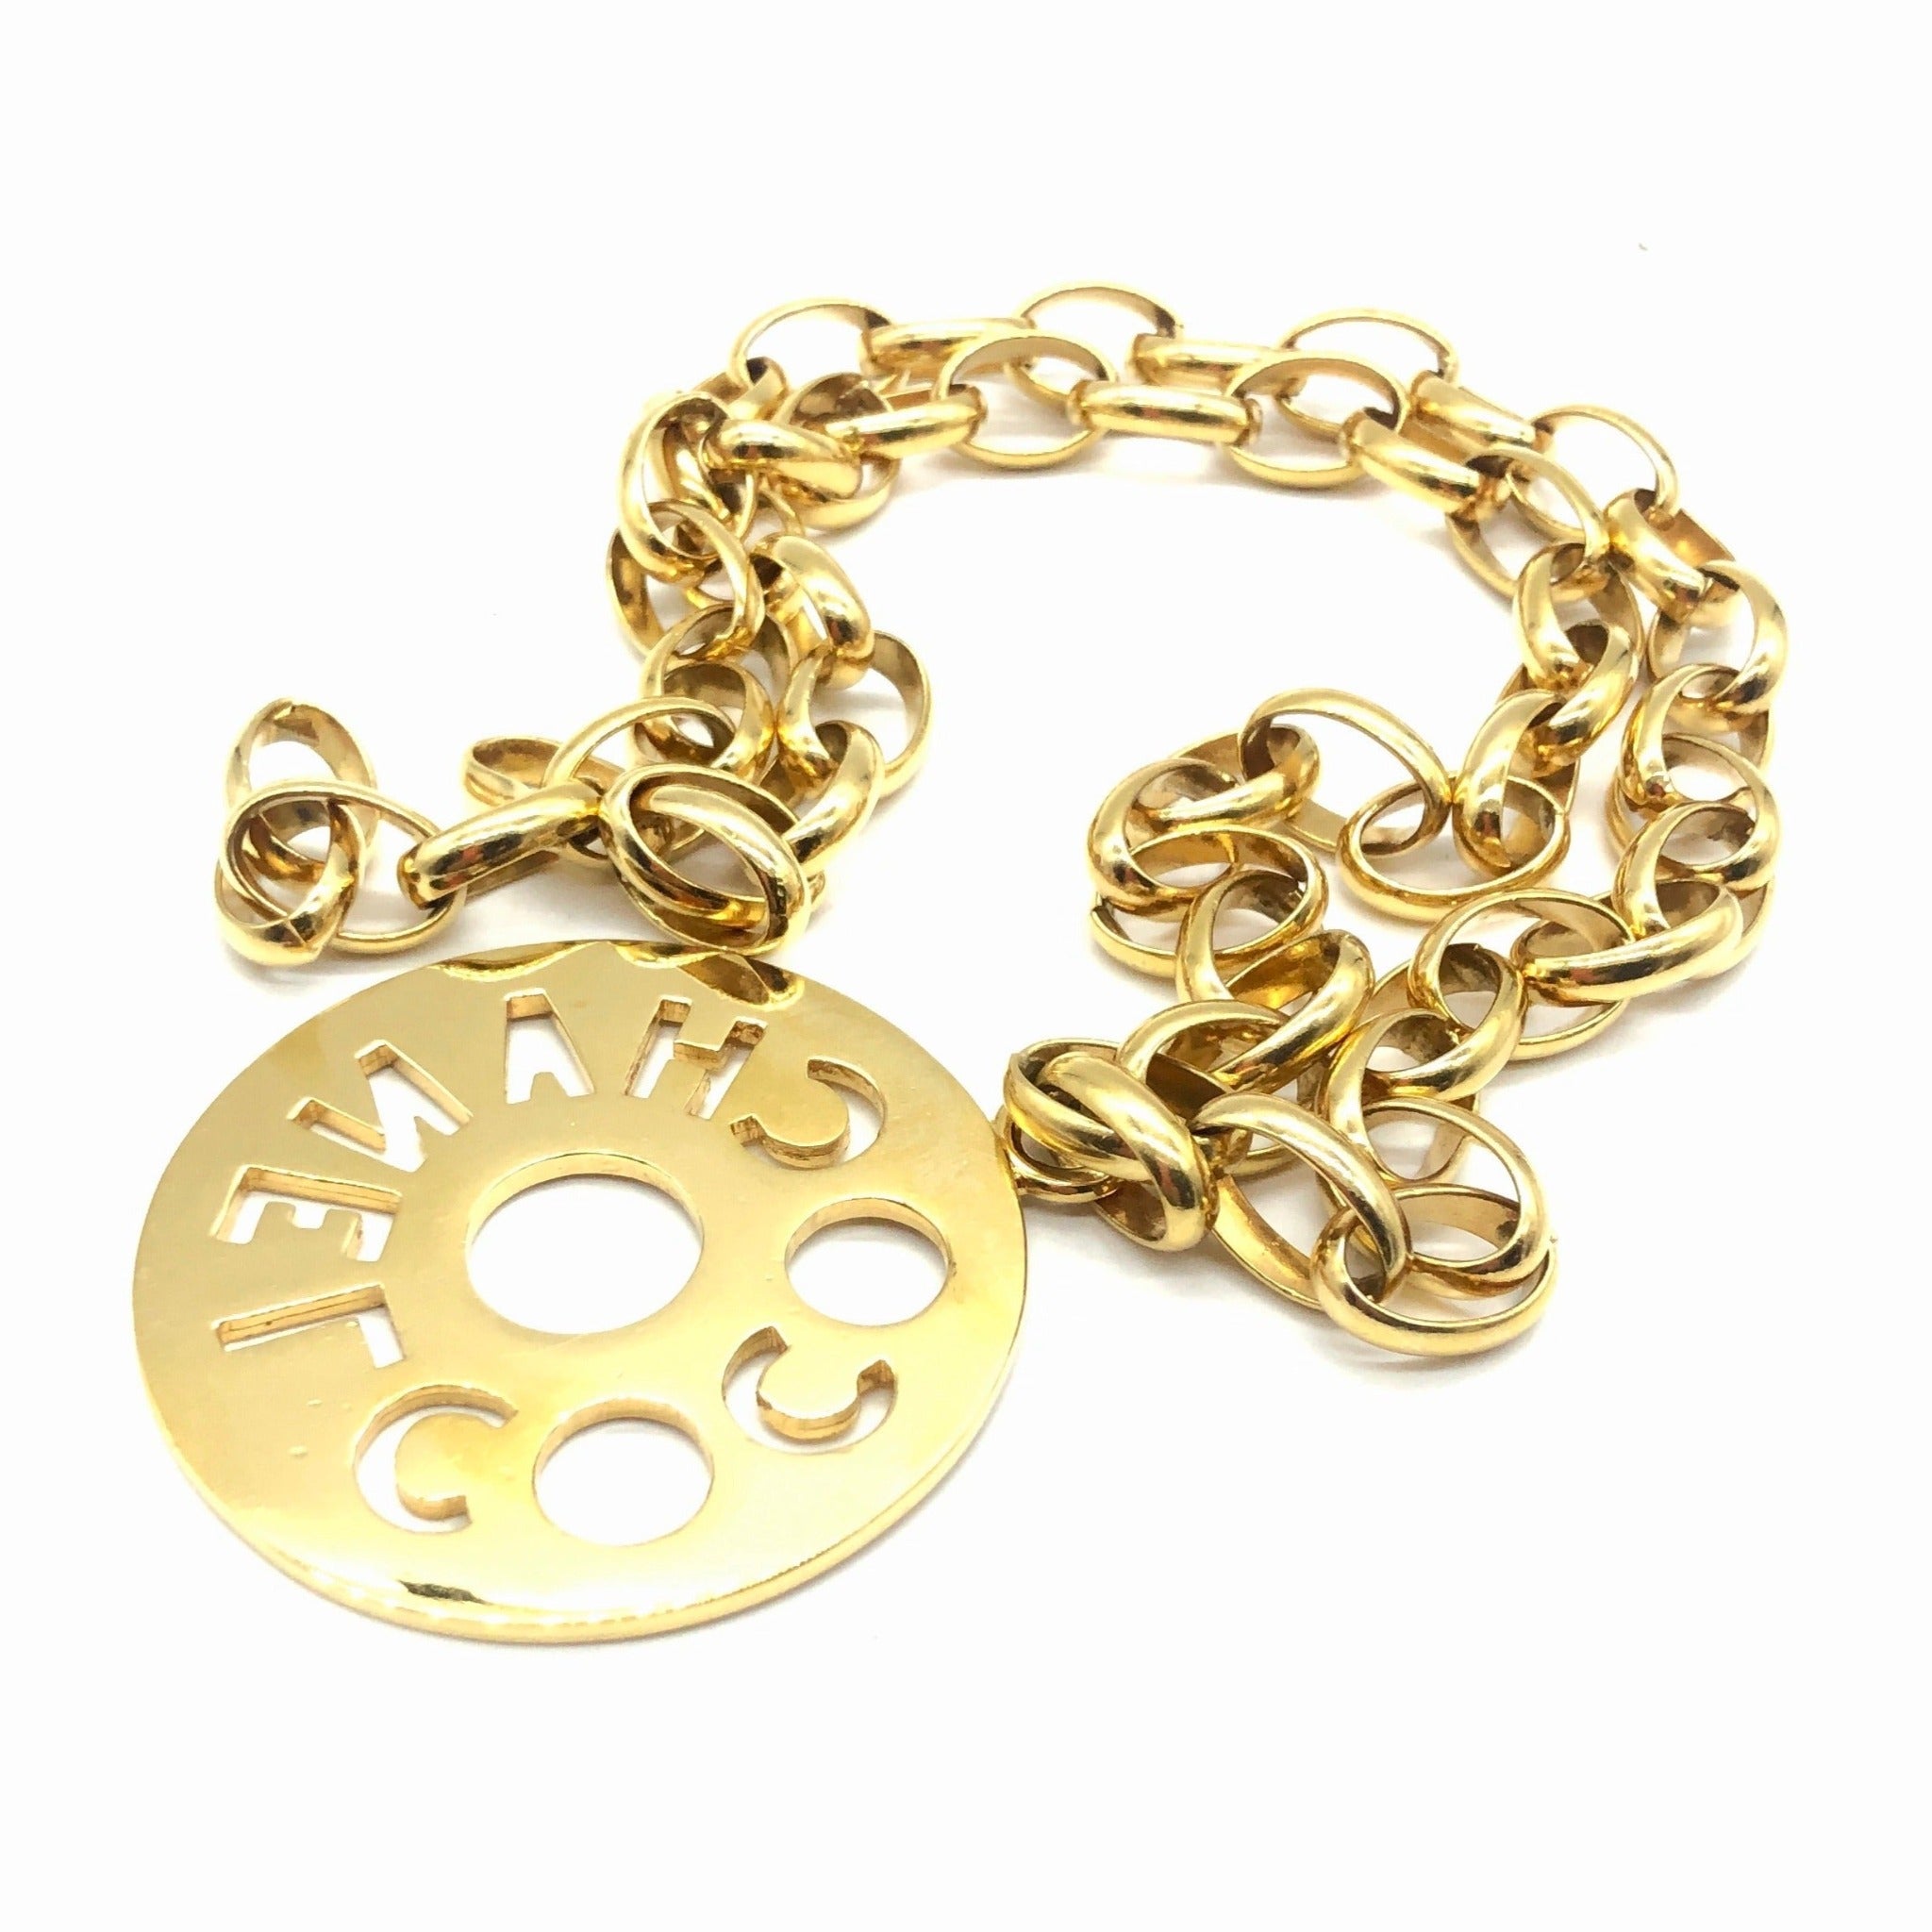 Chanel Necklace Cutout Flower With Large CC Vintage – Mightychic